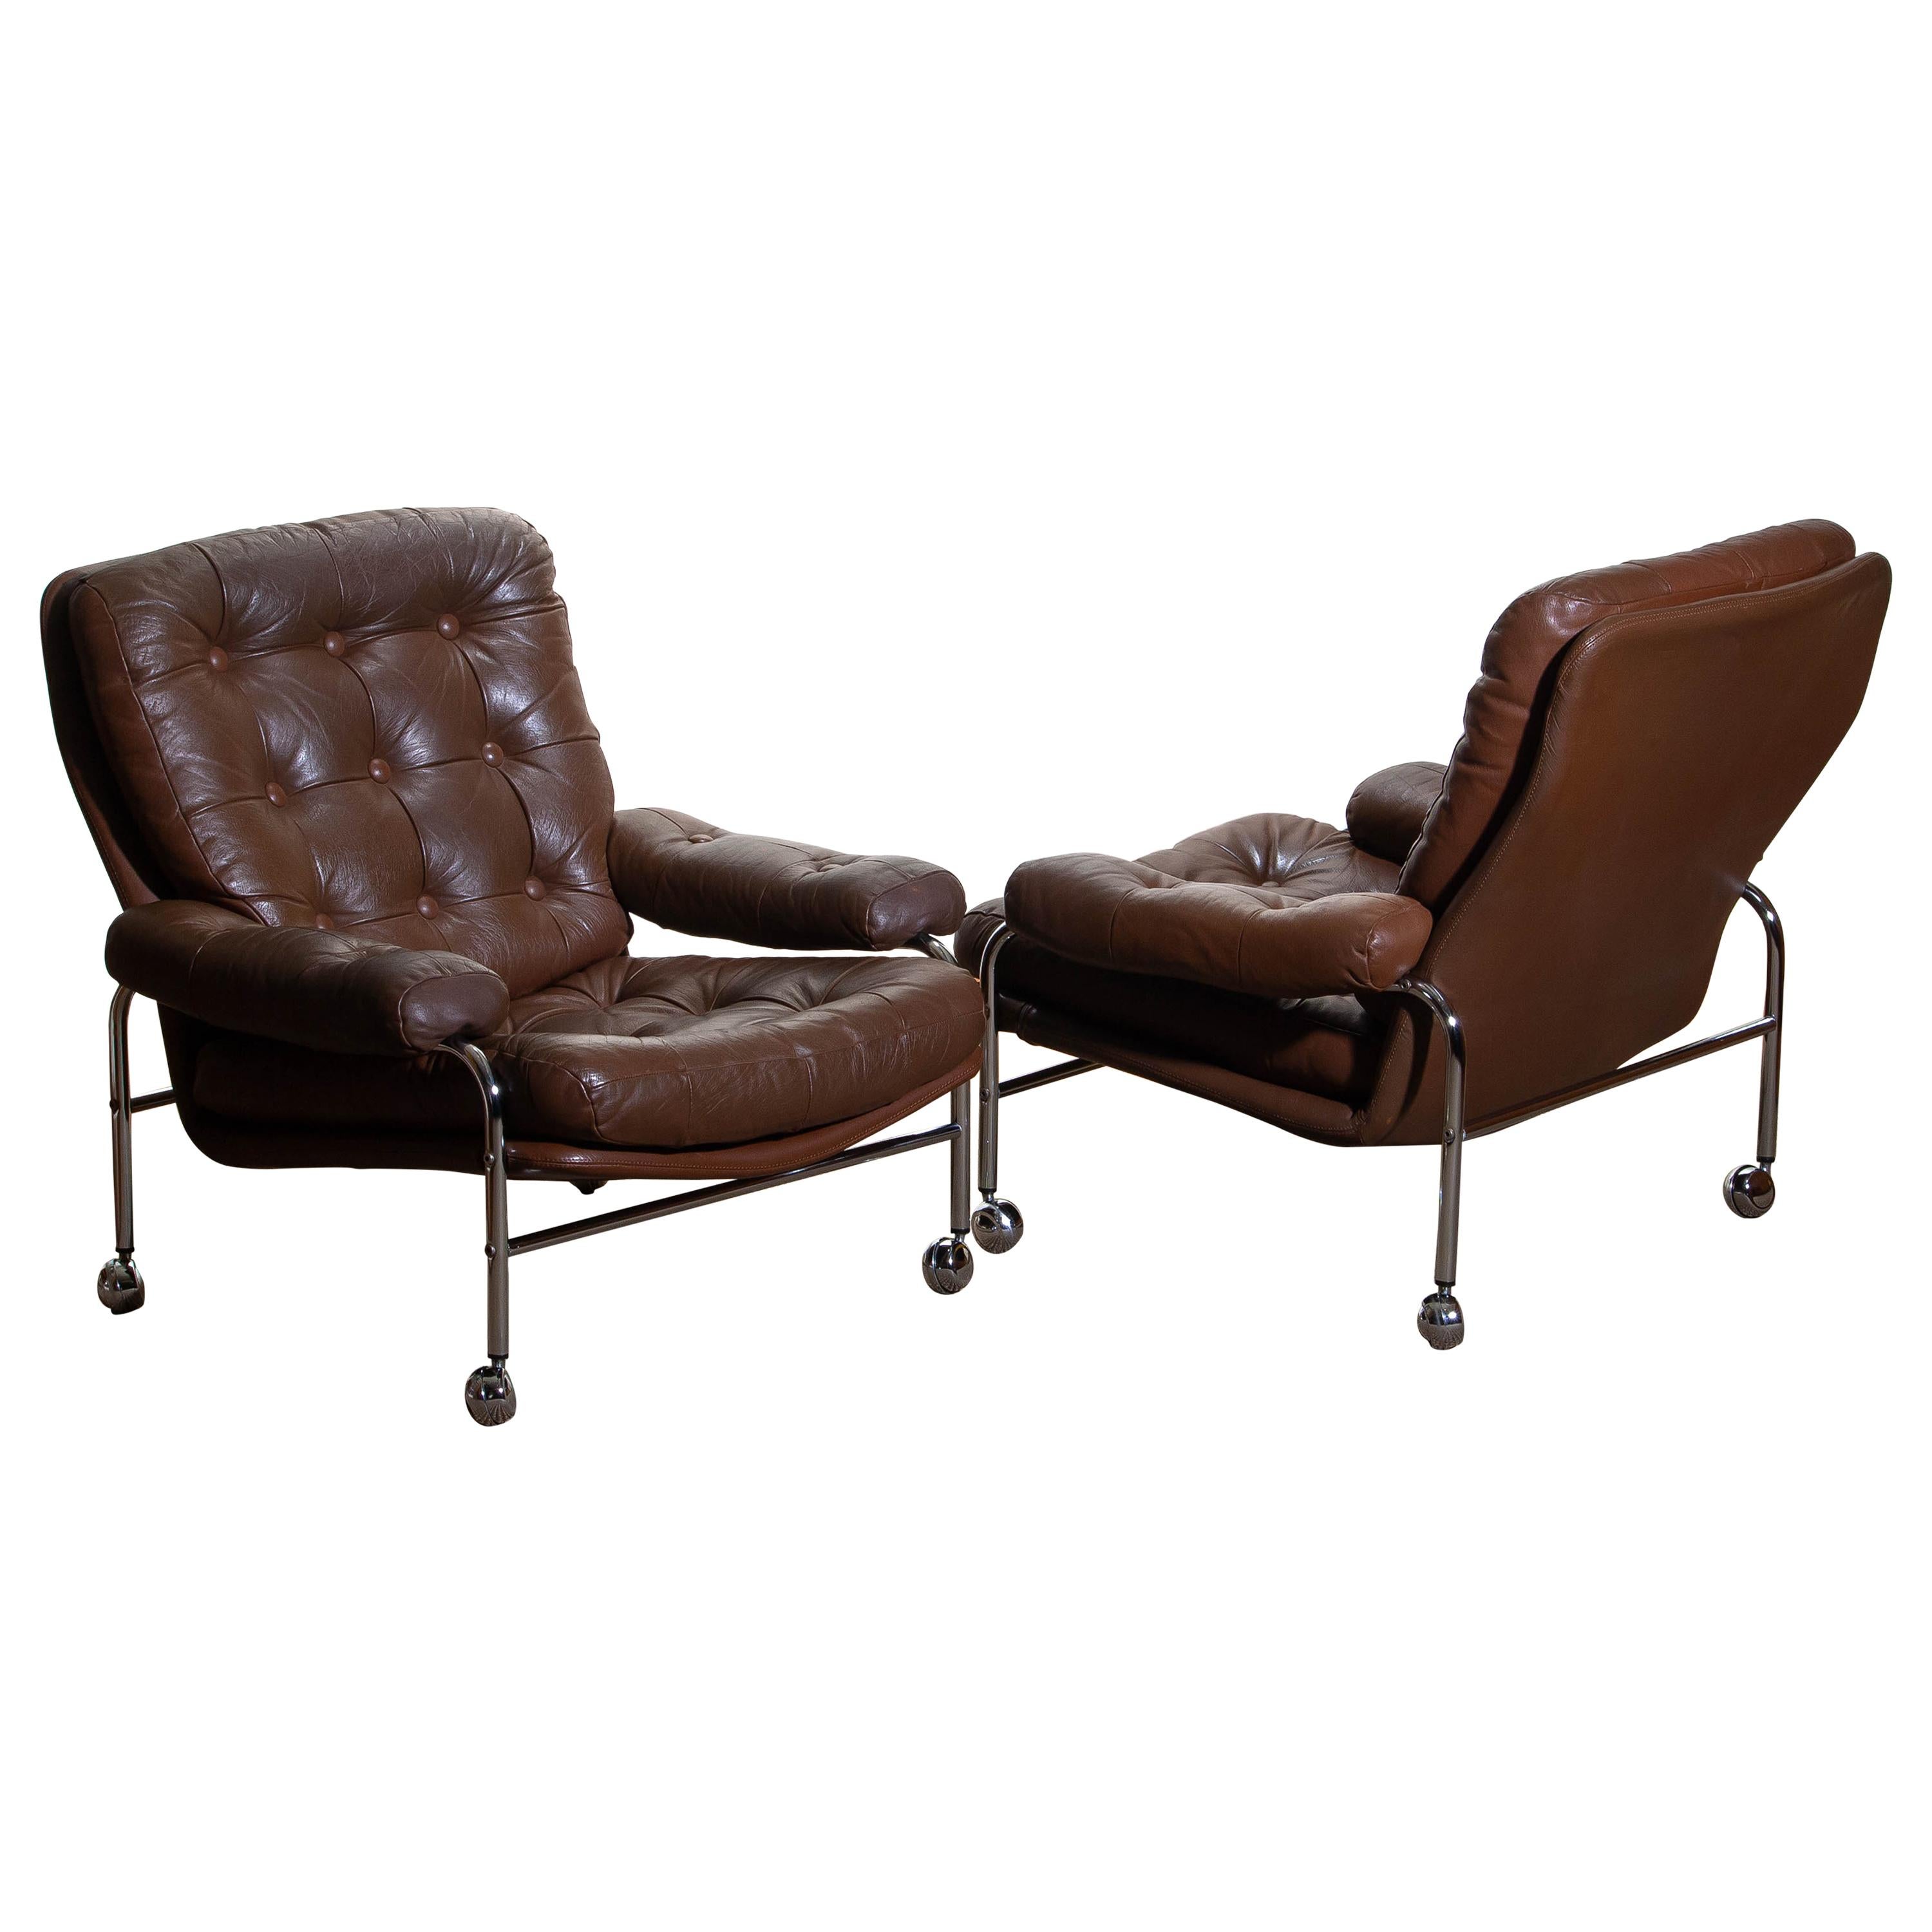 1970s, Chrome and Brown Leather Lounge Chairs by Scapa Rydaholm, Sweden 1